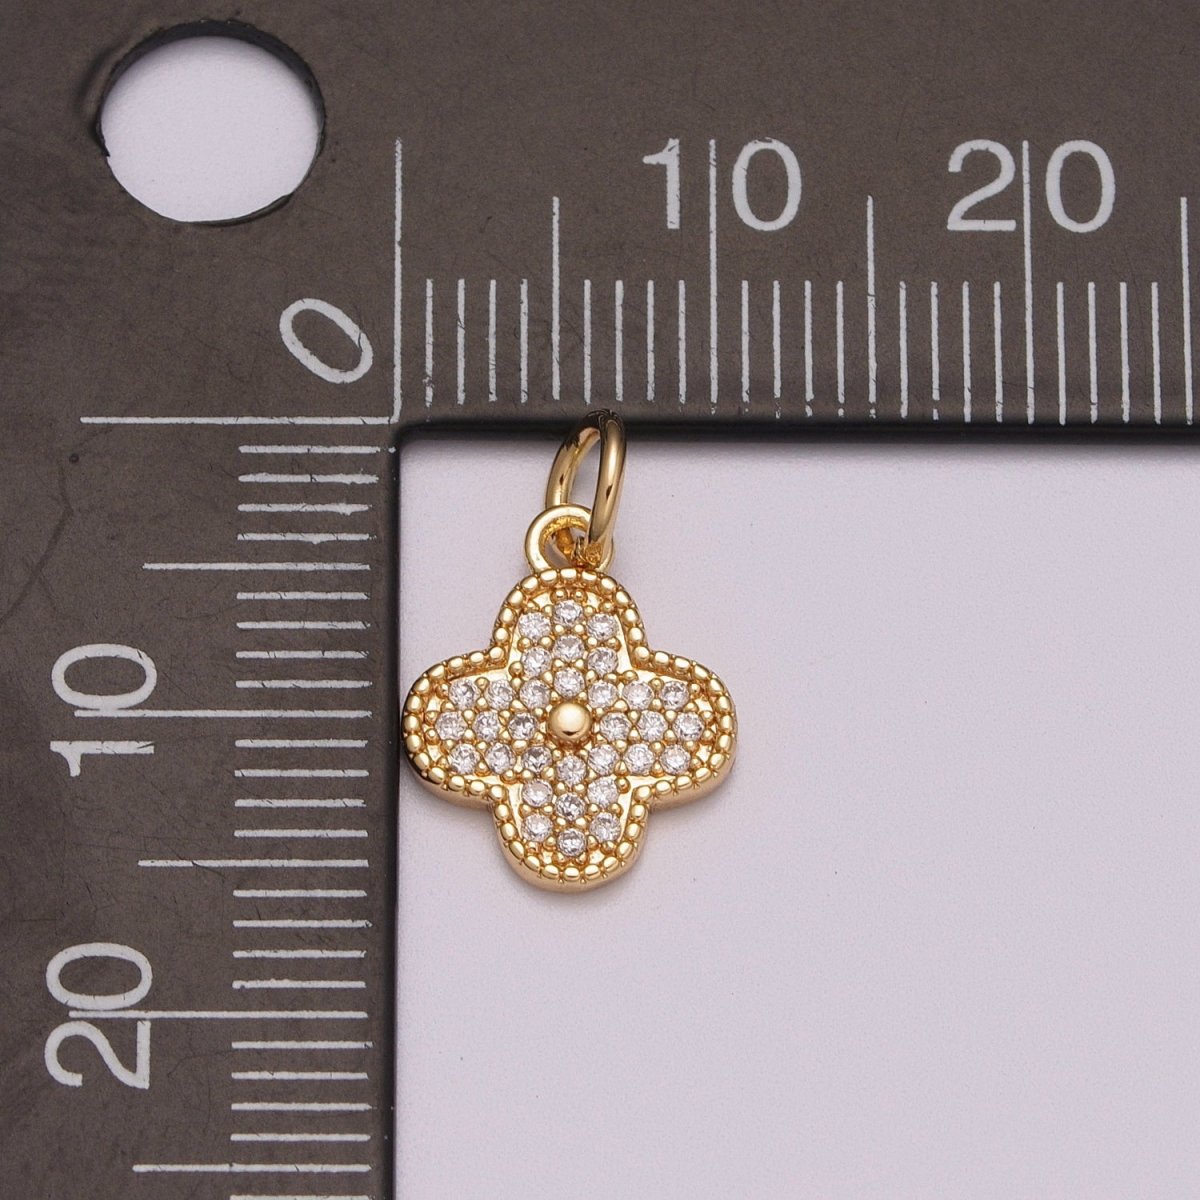 Dainty Clover Pendant Lucky Jewelry Component Add on Charm Micro Pave Shamrock Charm for Necklace Earring Bracelet Supply M-770 - DLUXCA